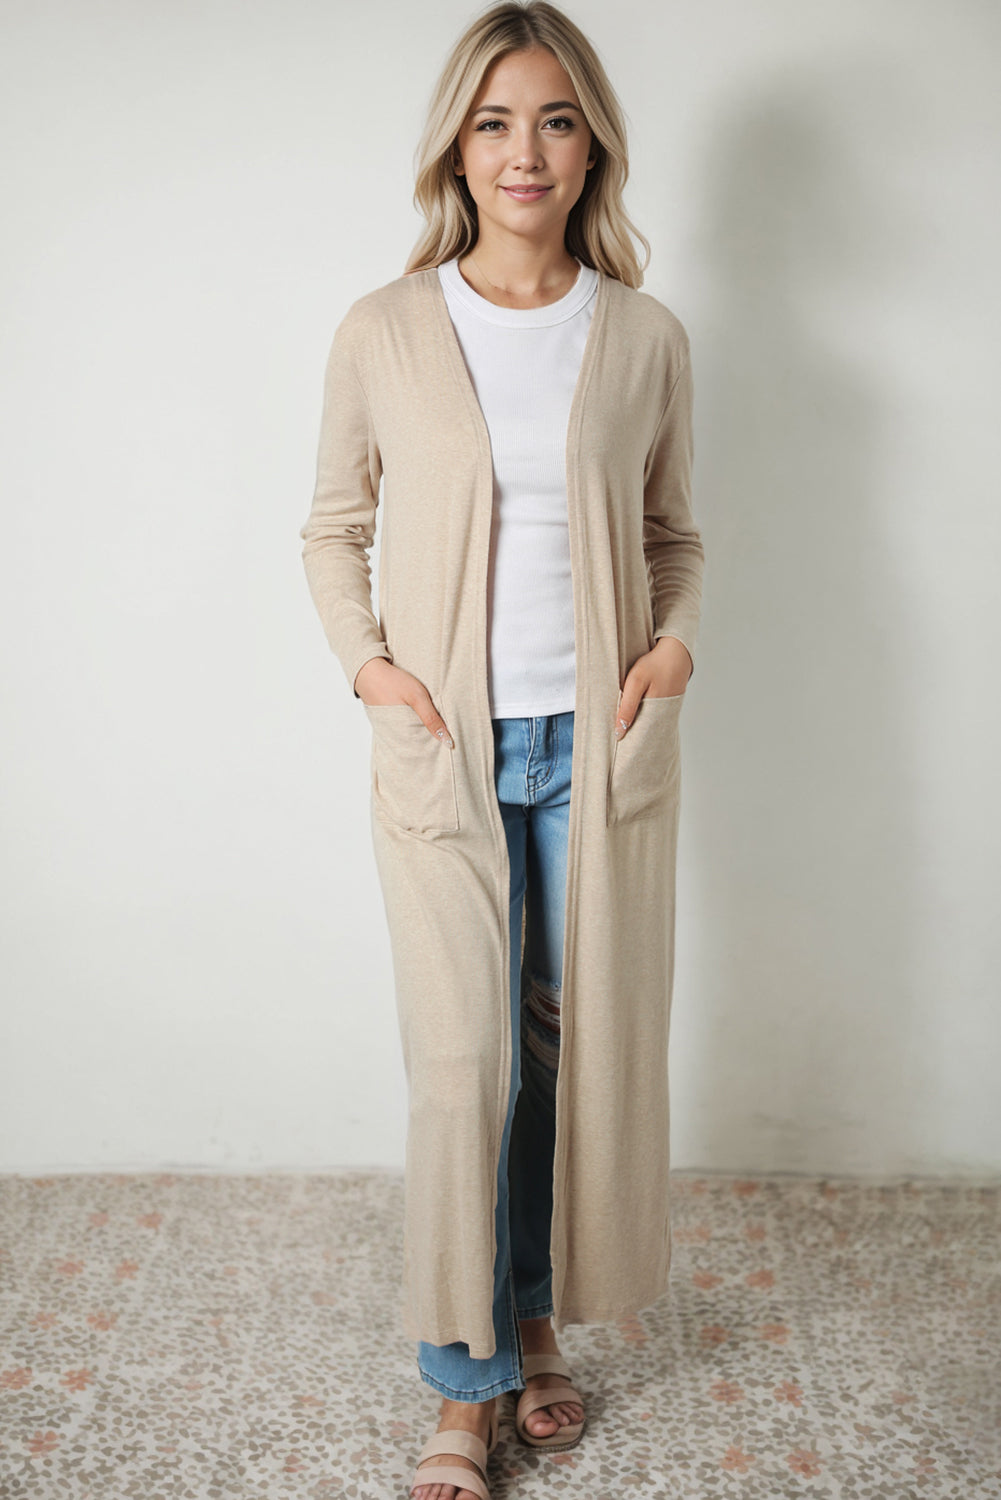 Long Sleeve Slit Cardigan with Pocket Print on any thing USA/STOD clothes